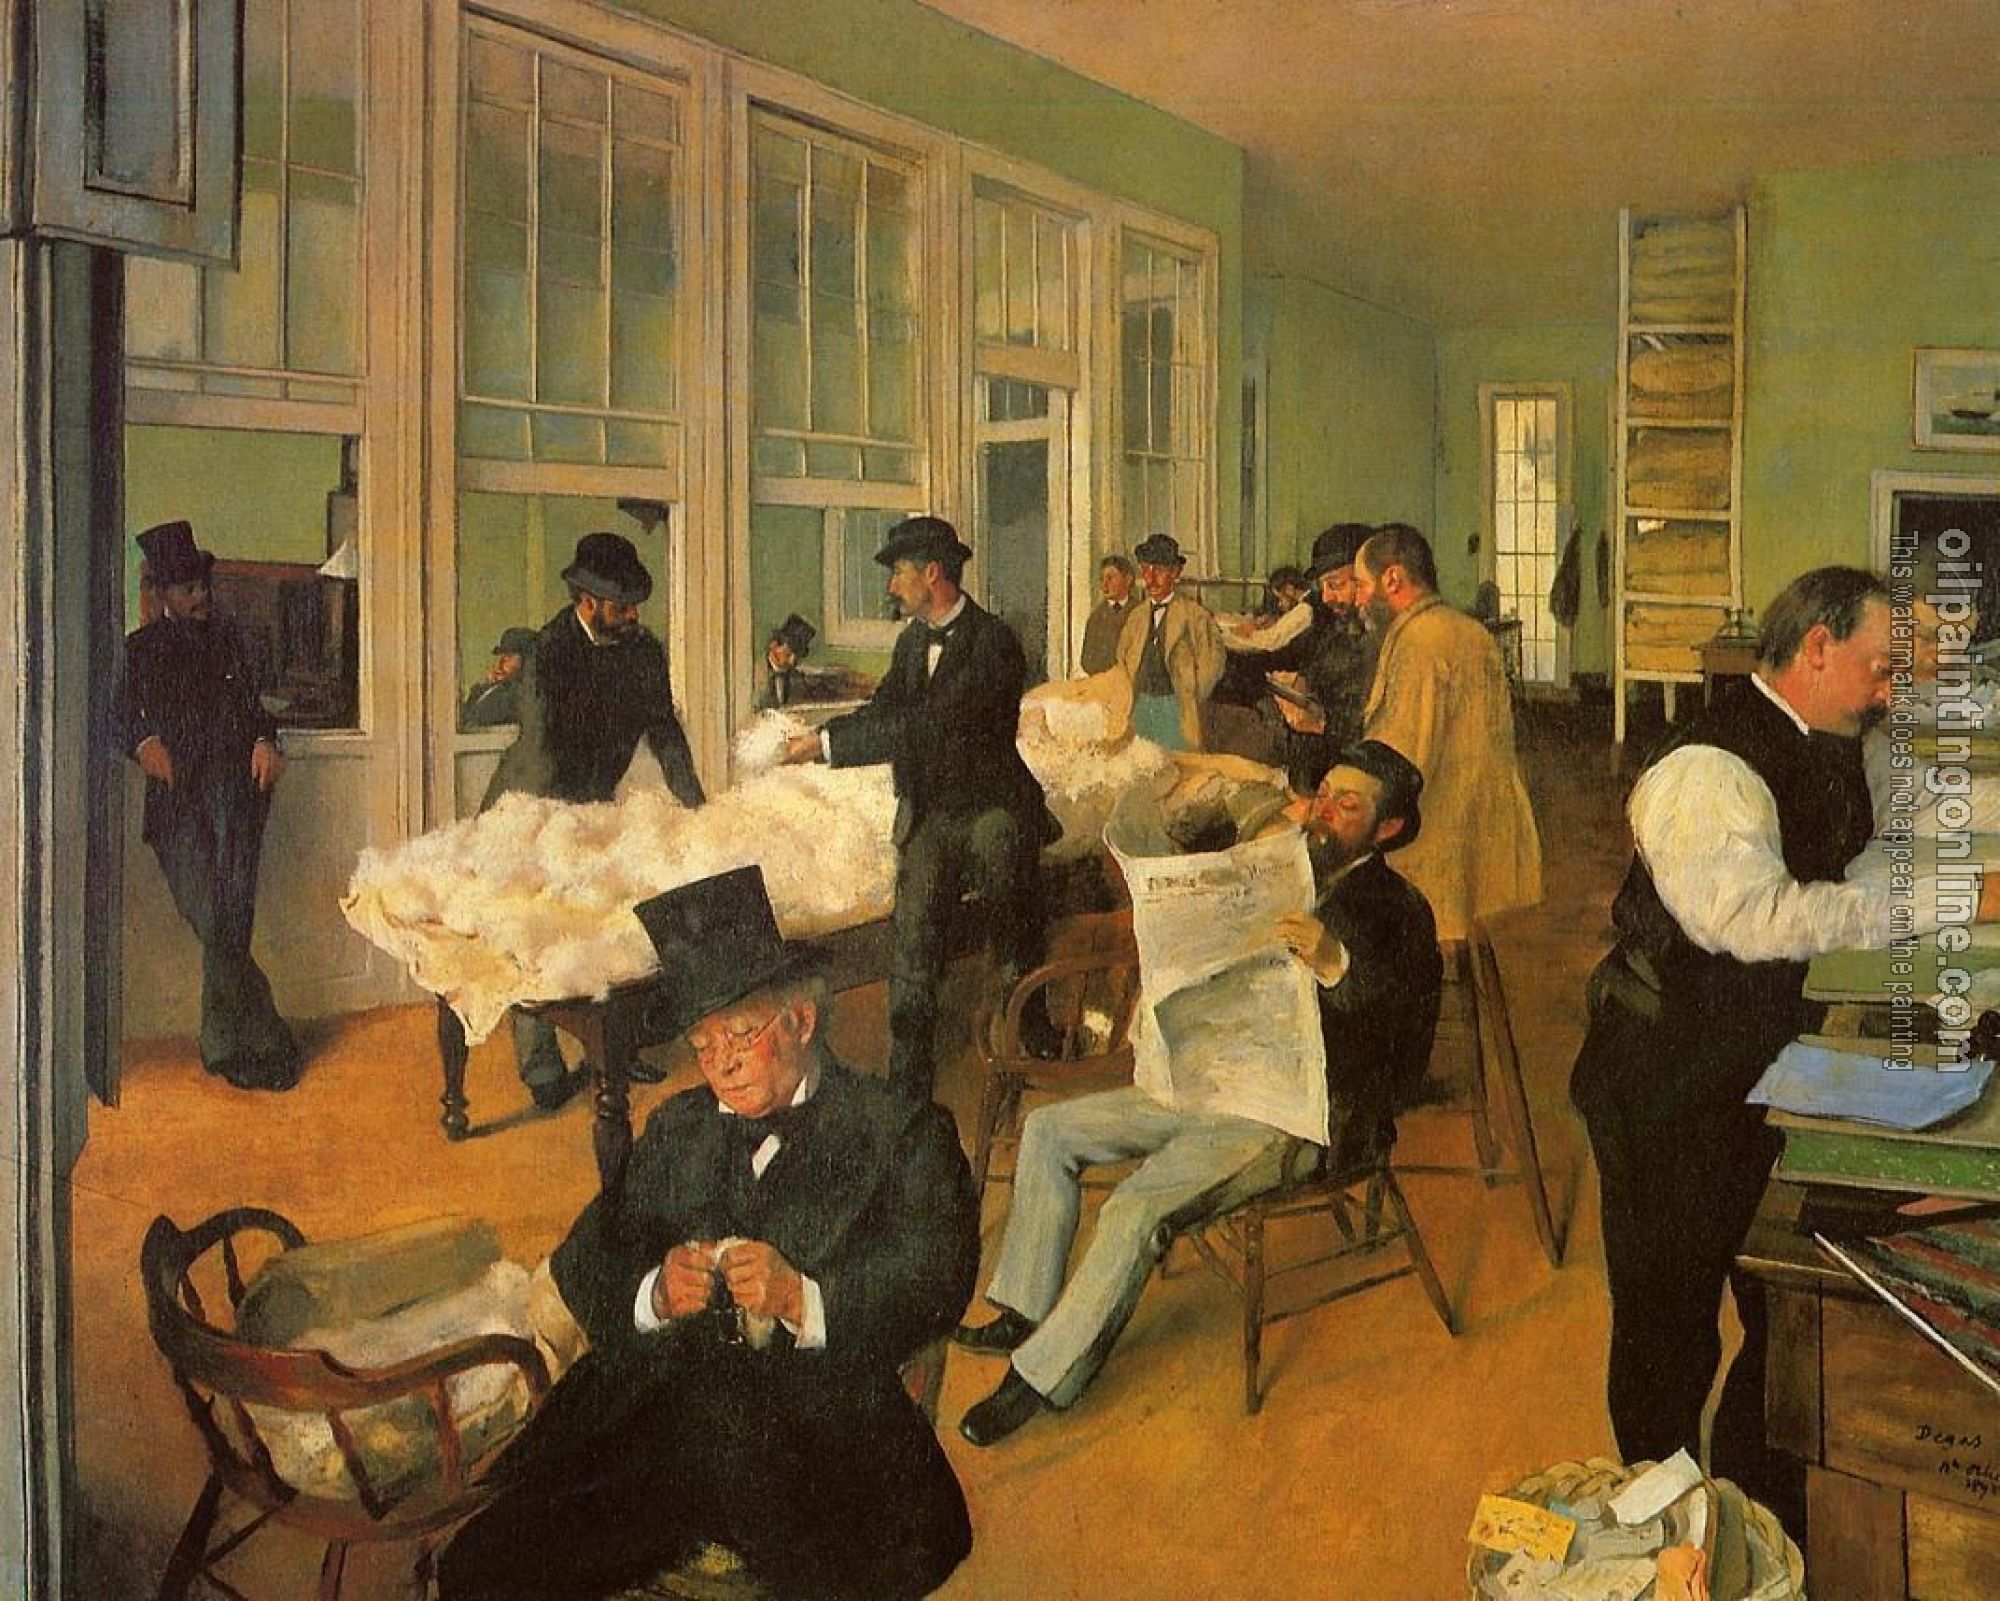 Degas, Edgar - The Cotton Exchange in New Orleans